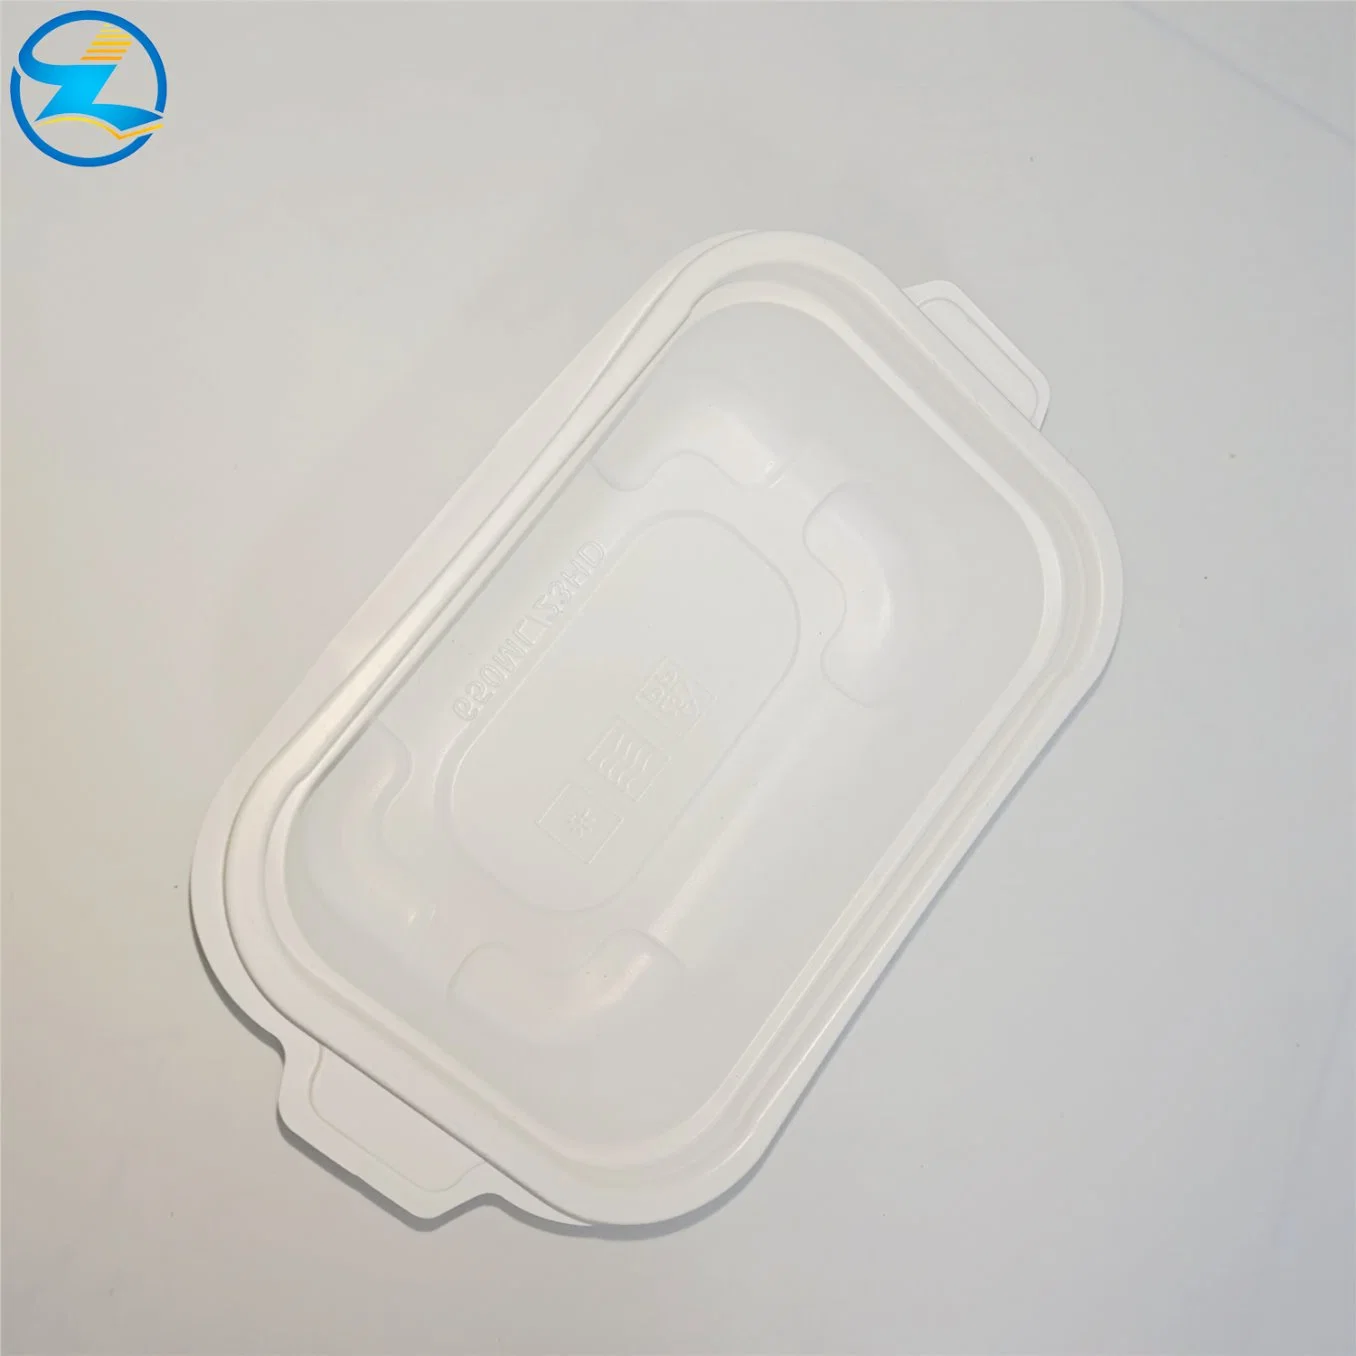 Black and White Plastic Pet Sheets Rigid Films for Packing